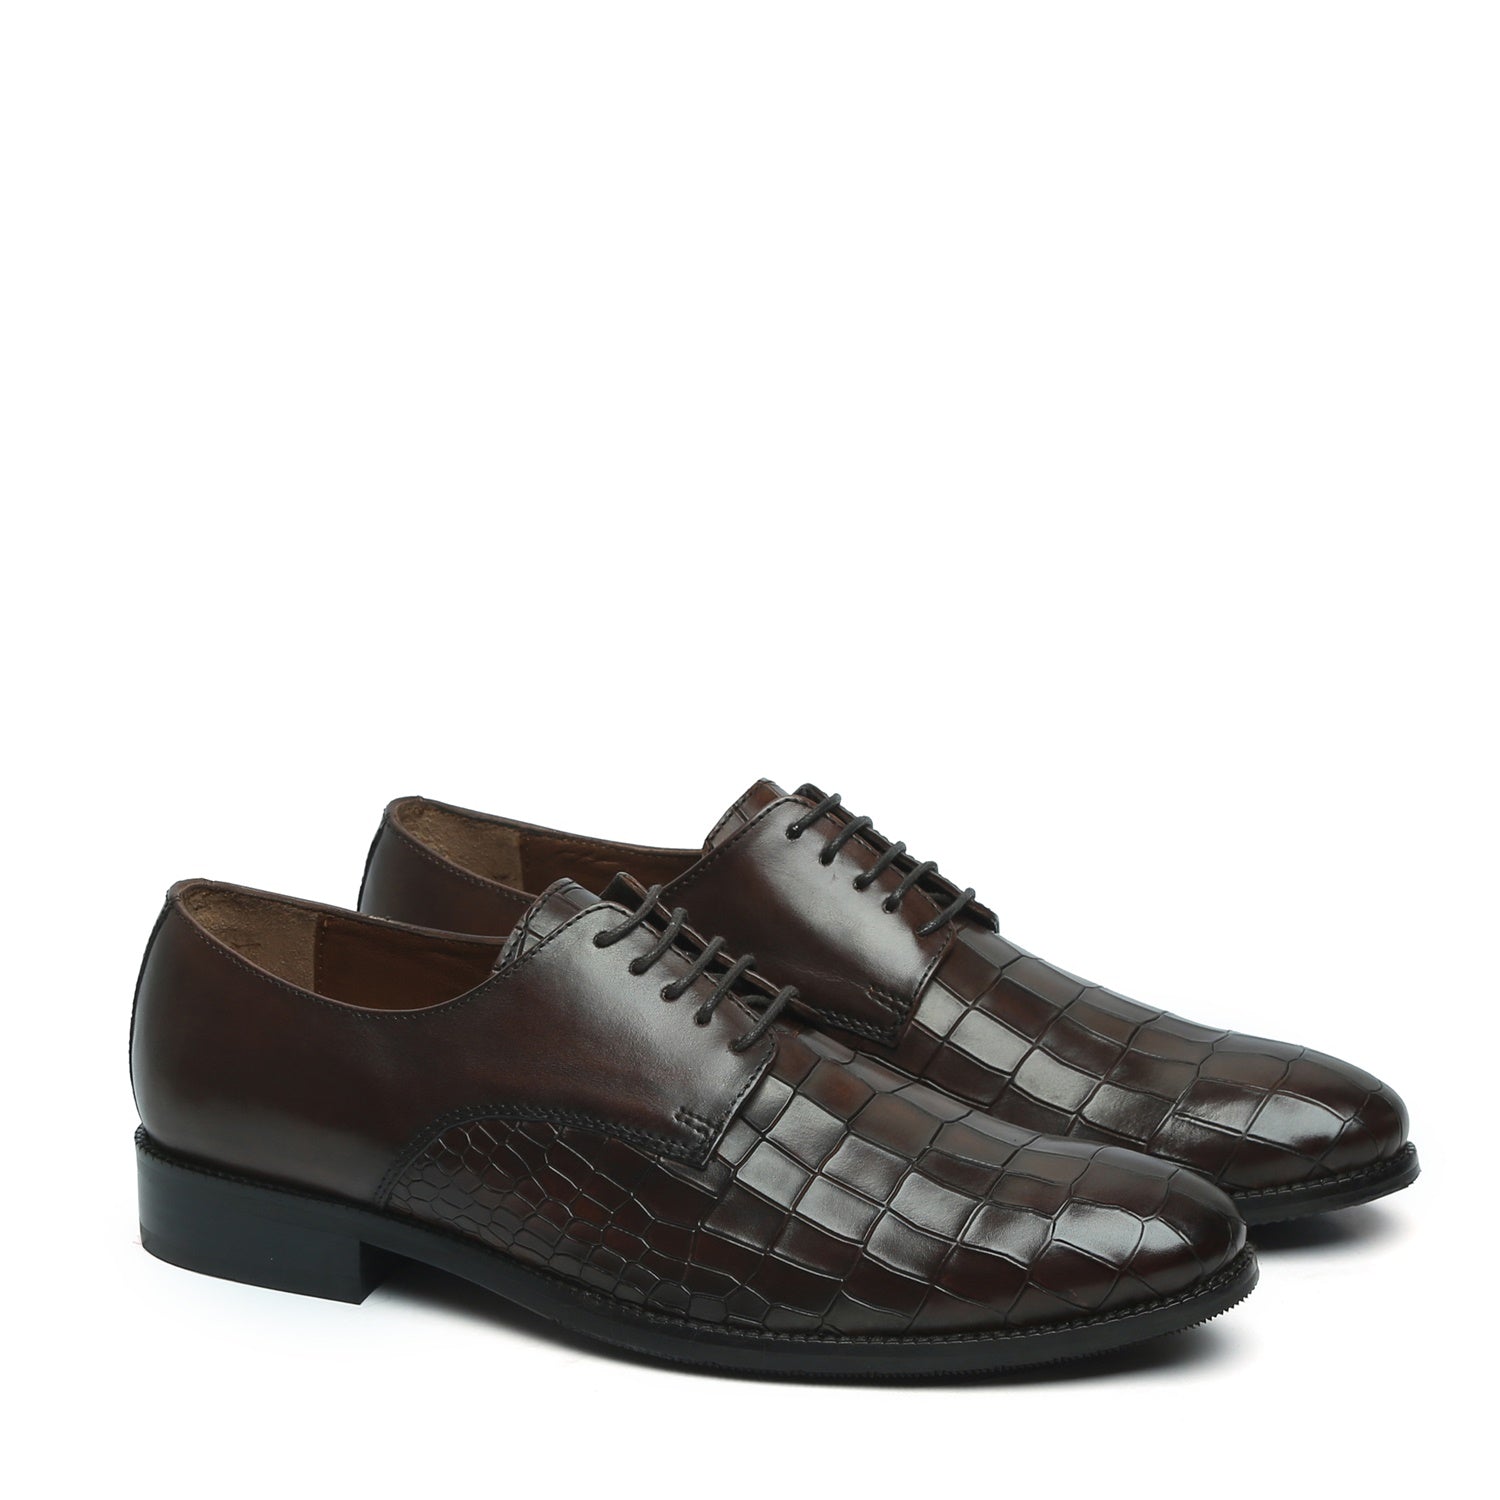 Brown Lace-Up Shoes with Deep Cut Leather Toe by Brune & Bareskin